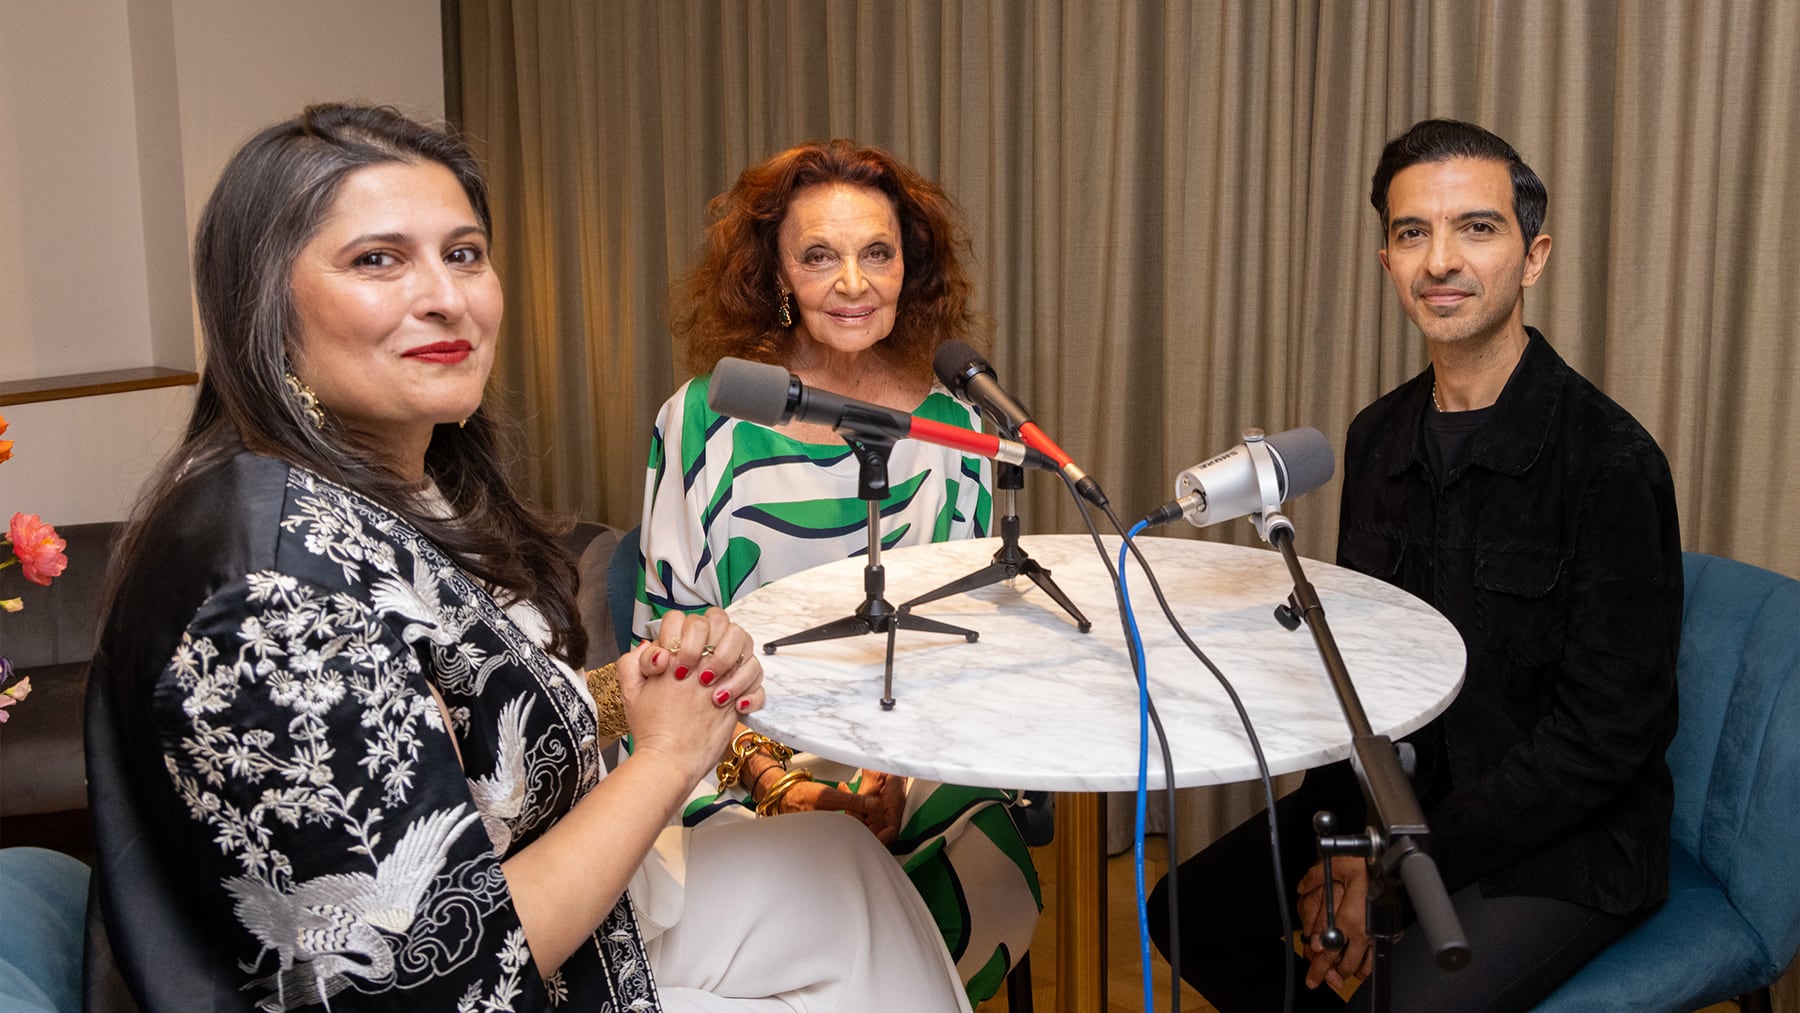 The BoF Podcast | Diane von Furstenberg on the Making of Her New Documentary